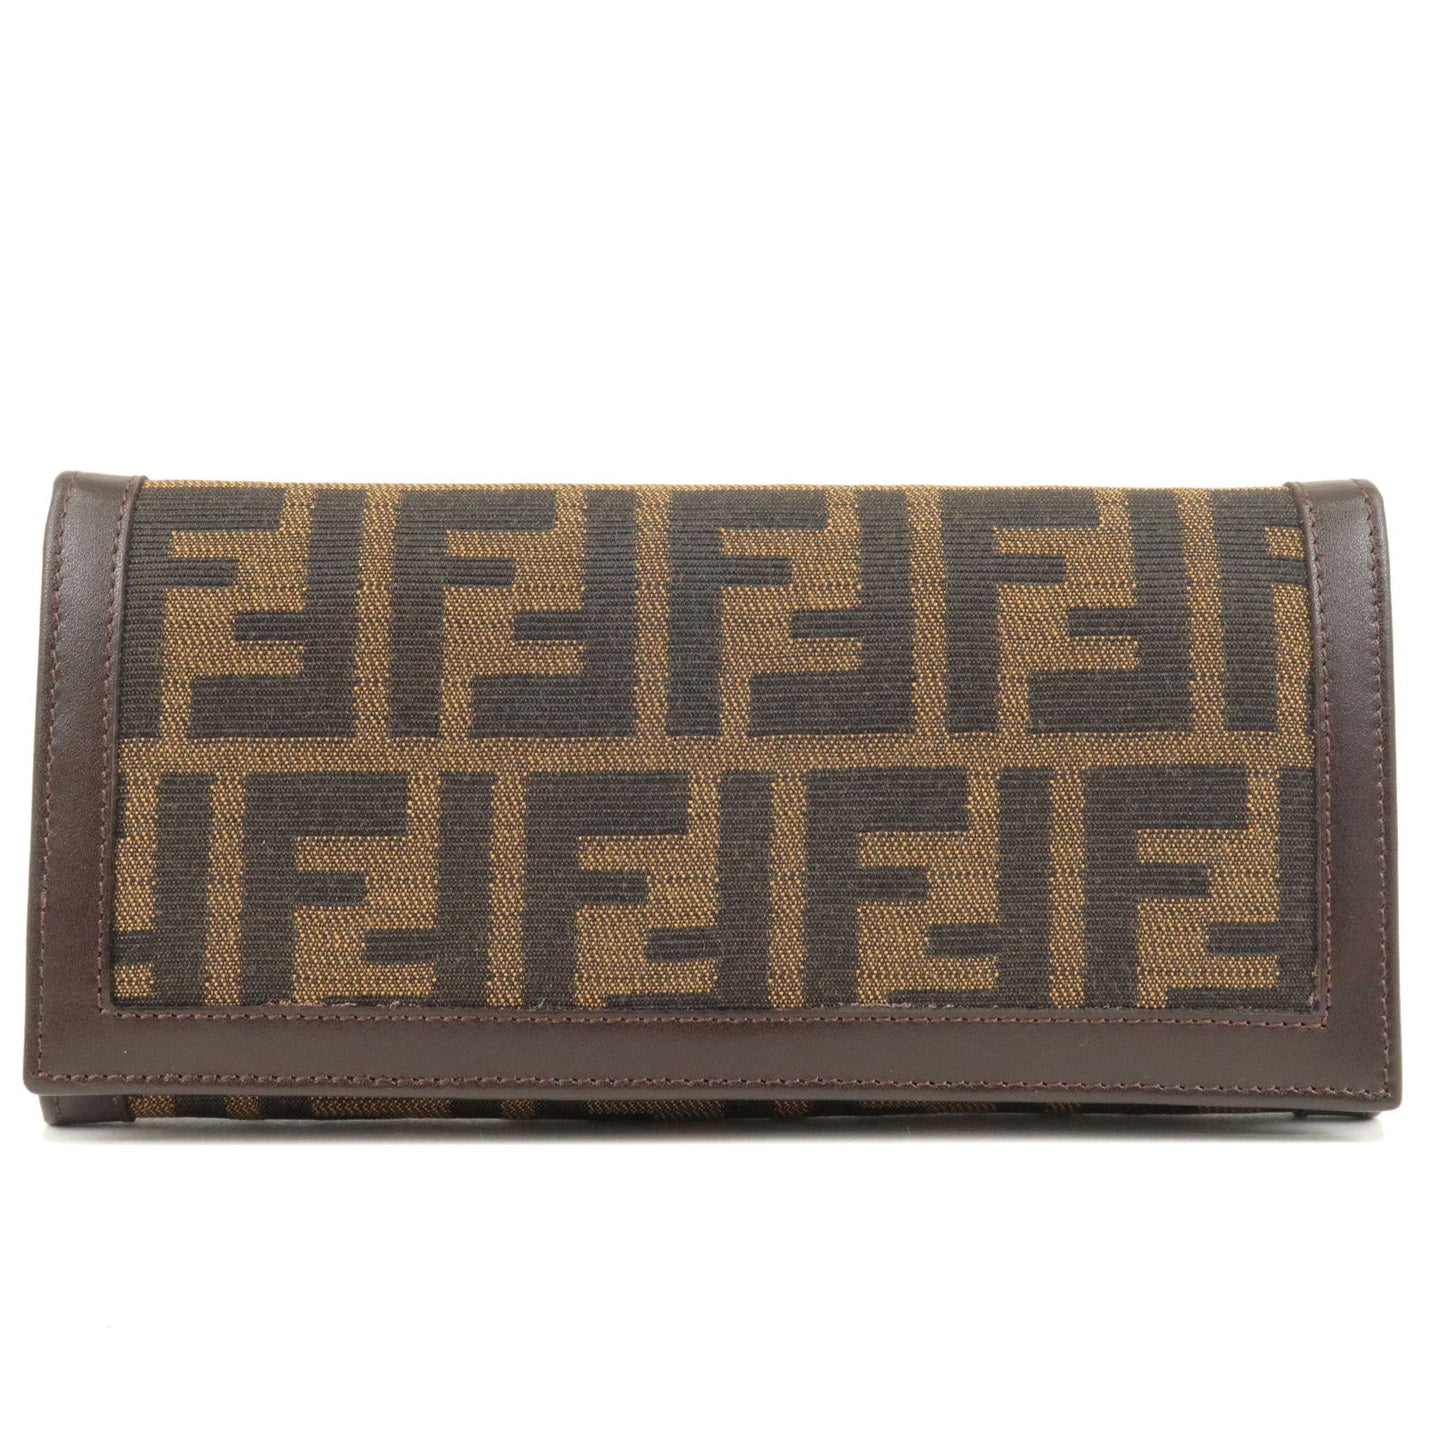 FENDI-Zucca-Print-Canvas-Leather-Long-Wallet-Brown-30851